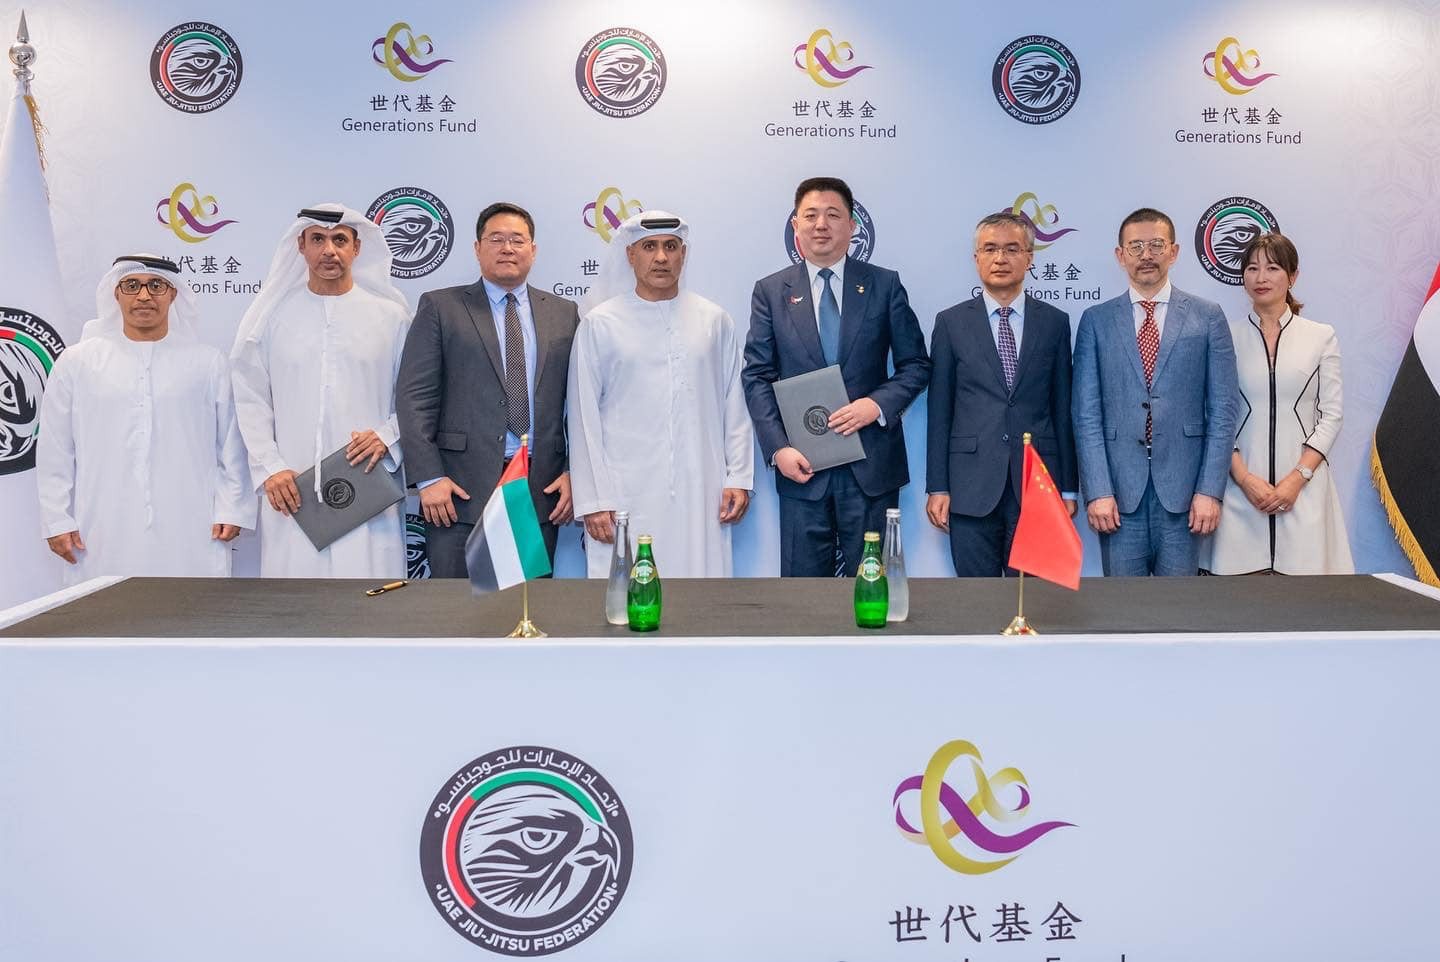 The agreement is claimed to benefit ju-jitsu in China ahead of the Hangzhou 2022 Asian Games ©UAEJJF